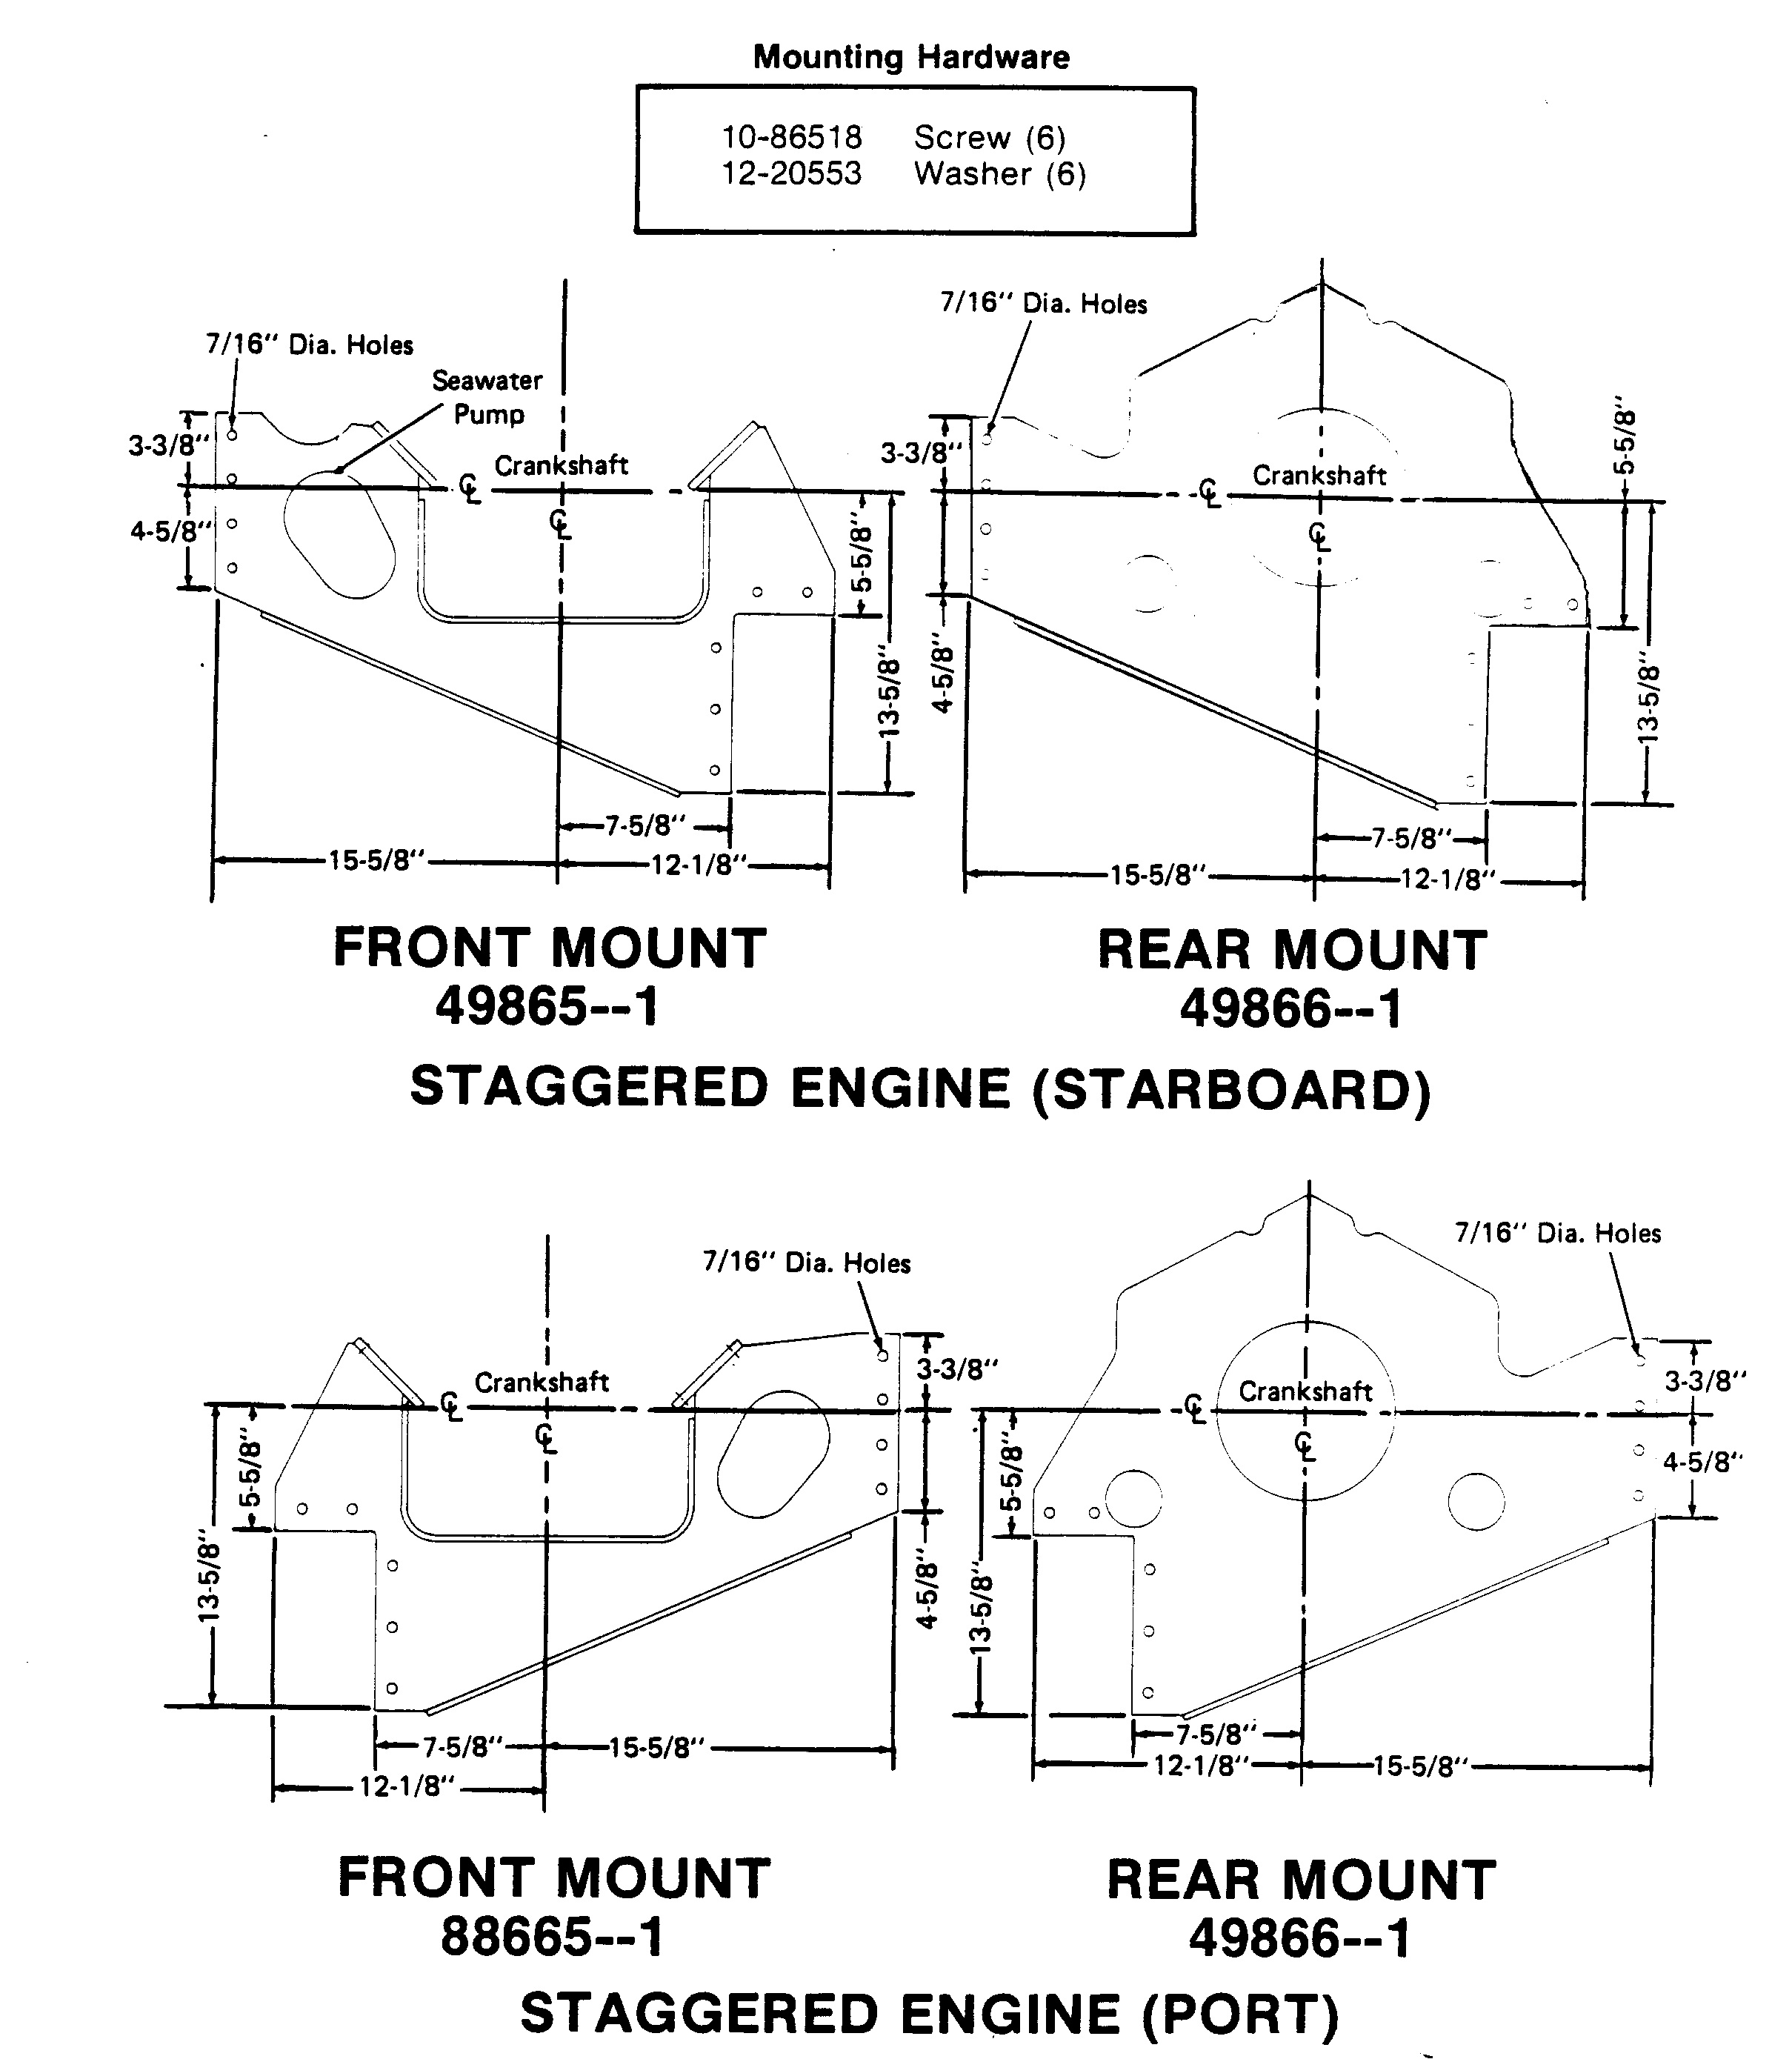 MOUNT PLATES(STAGGERED ENGINES)